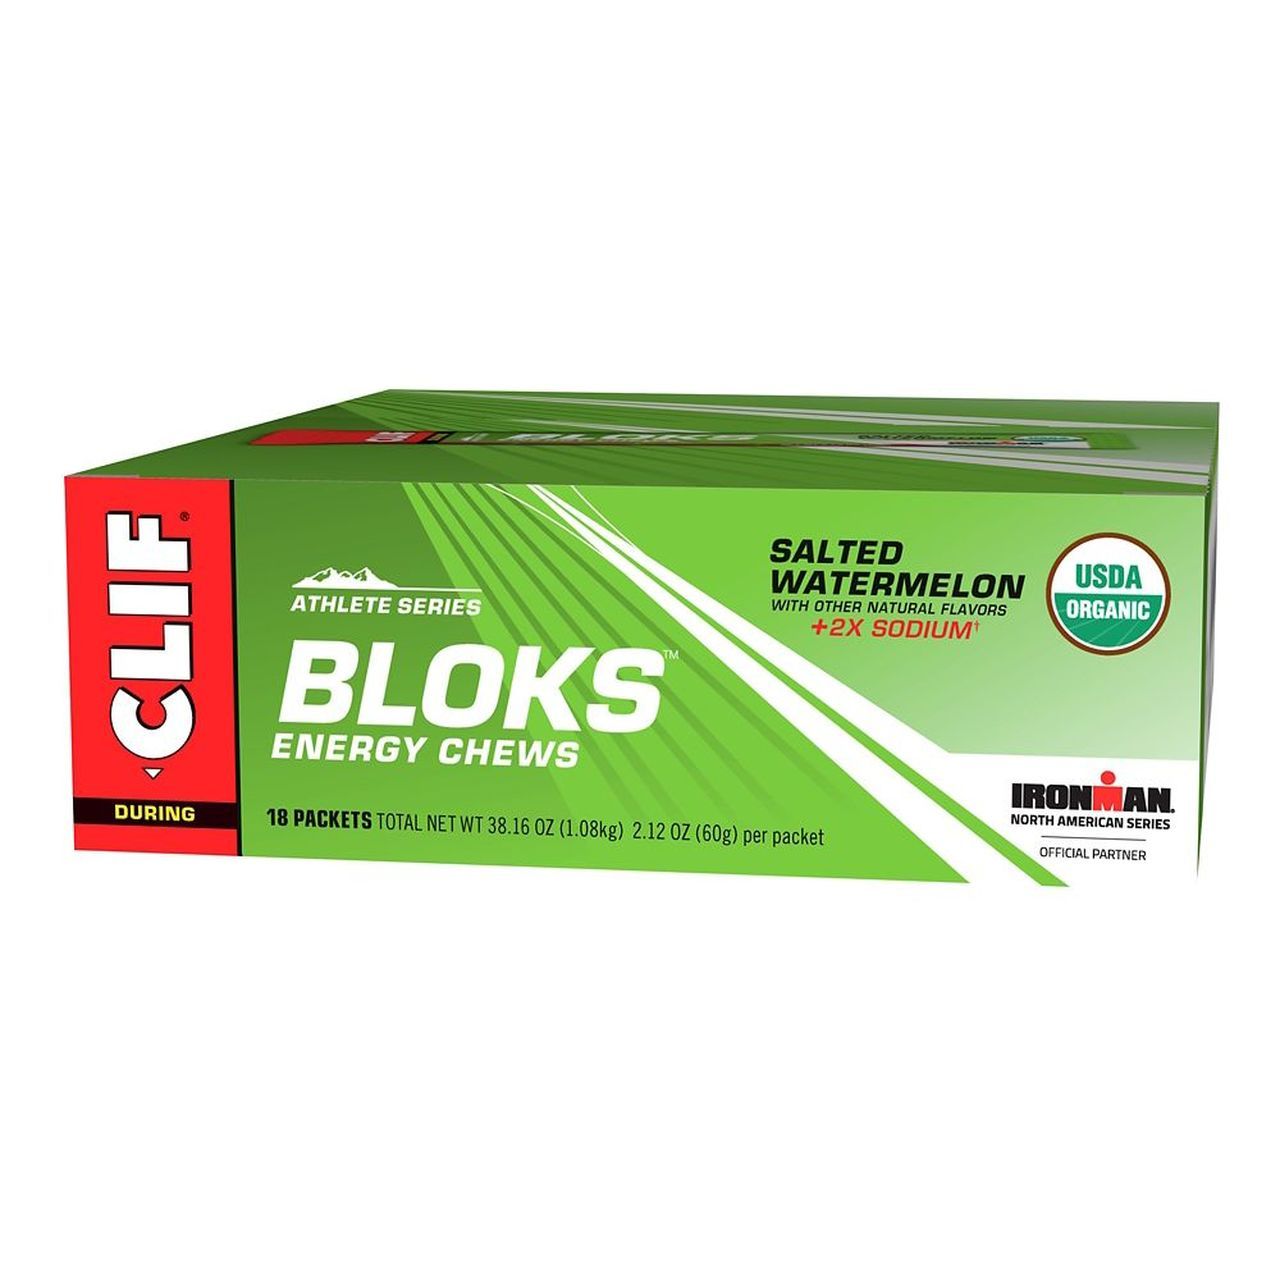 CLIF BLOKS Energy Chews CLIF Salted Watermelon 2.12 Oz-18 Count 